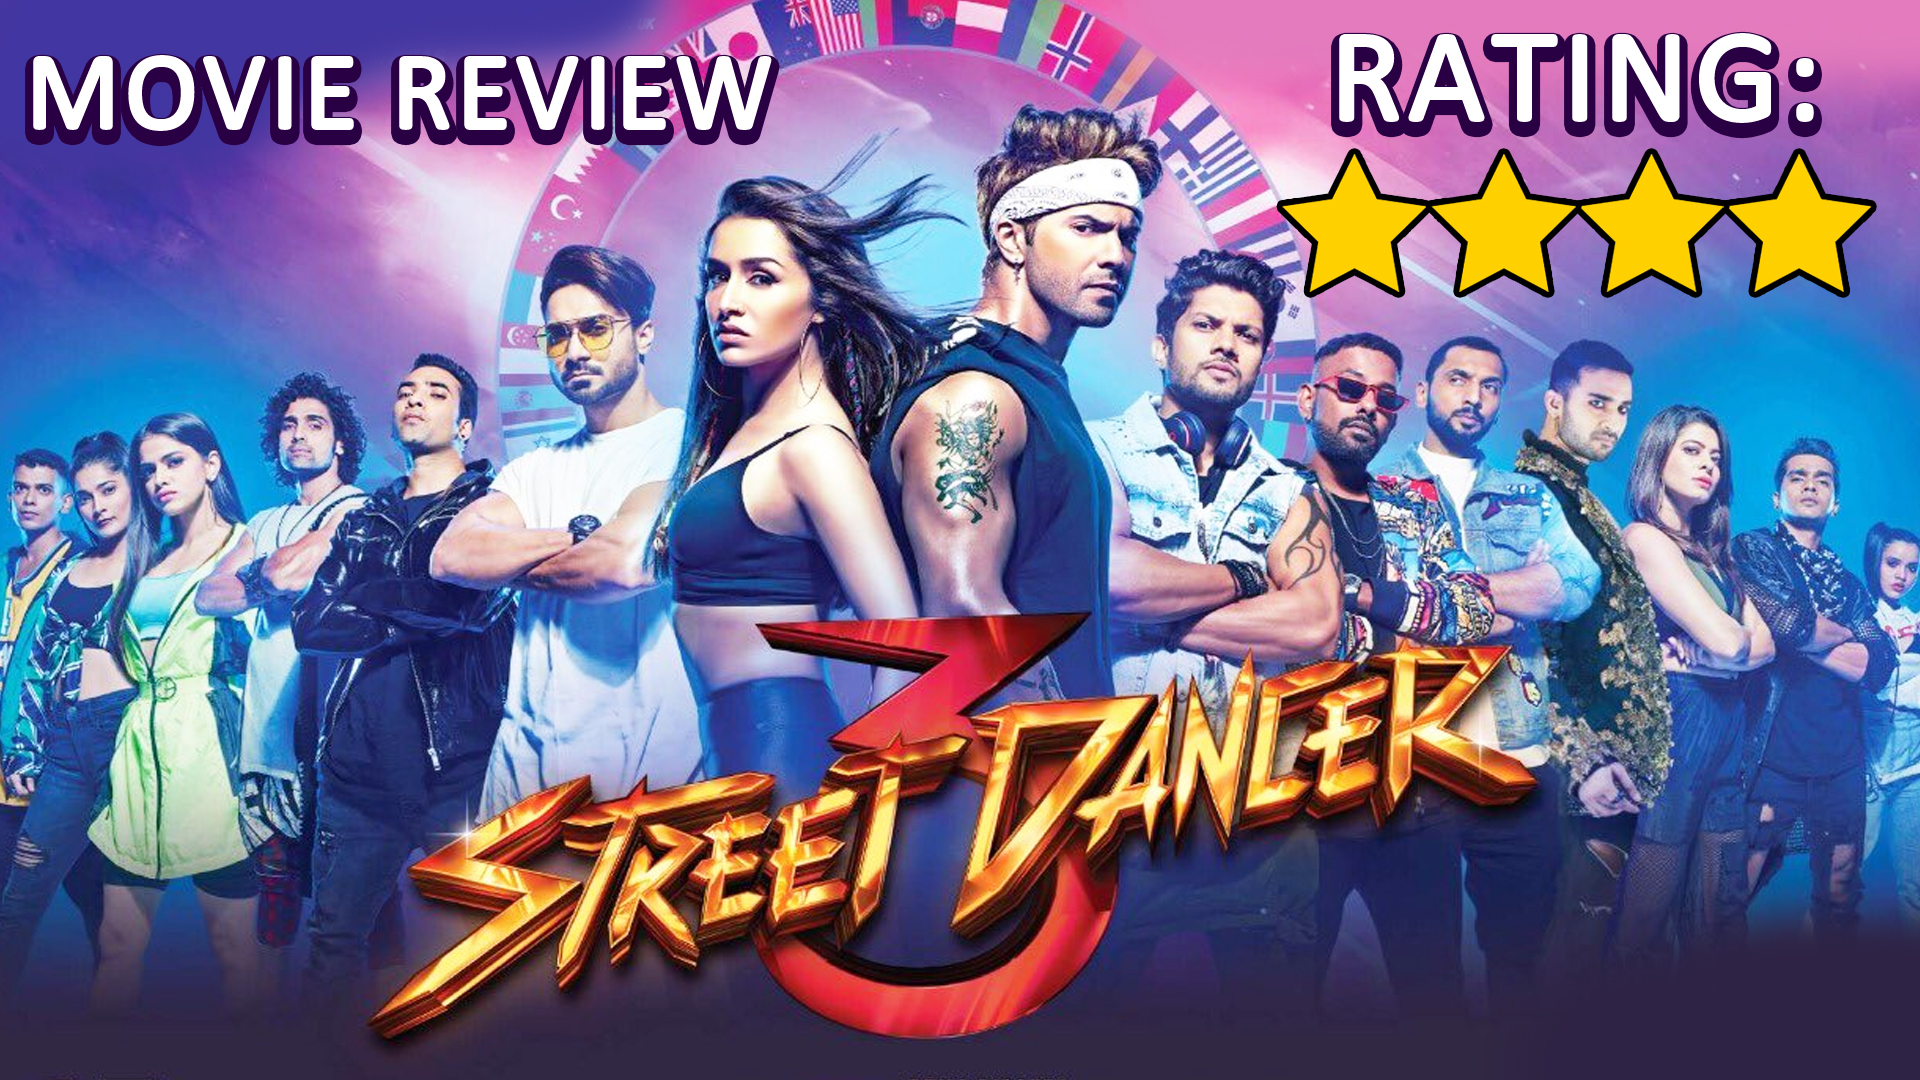 Street Dancer 3D Movie Review – Right amalgamation of eye grabbing dances & foot tapping music